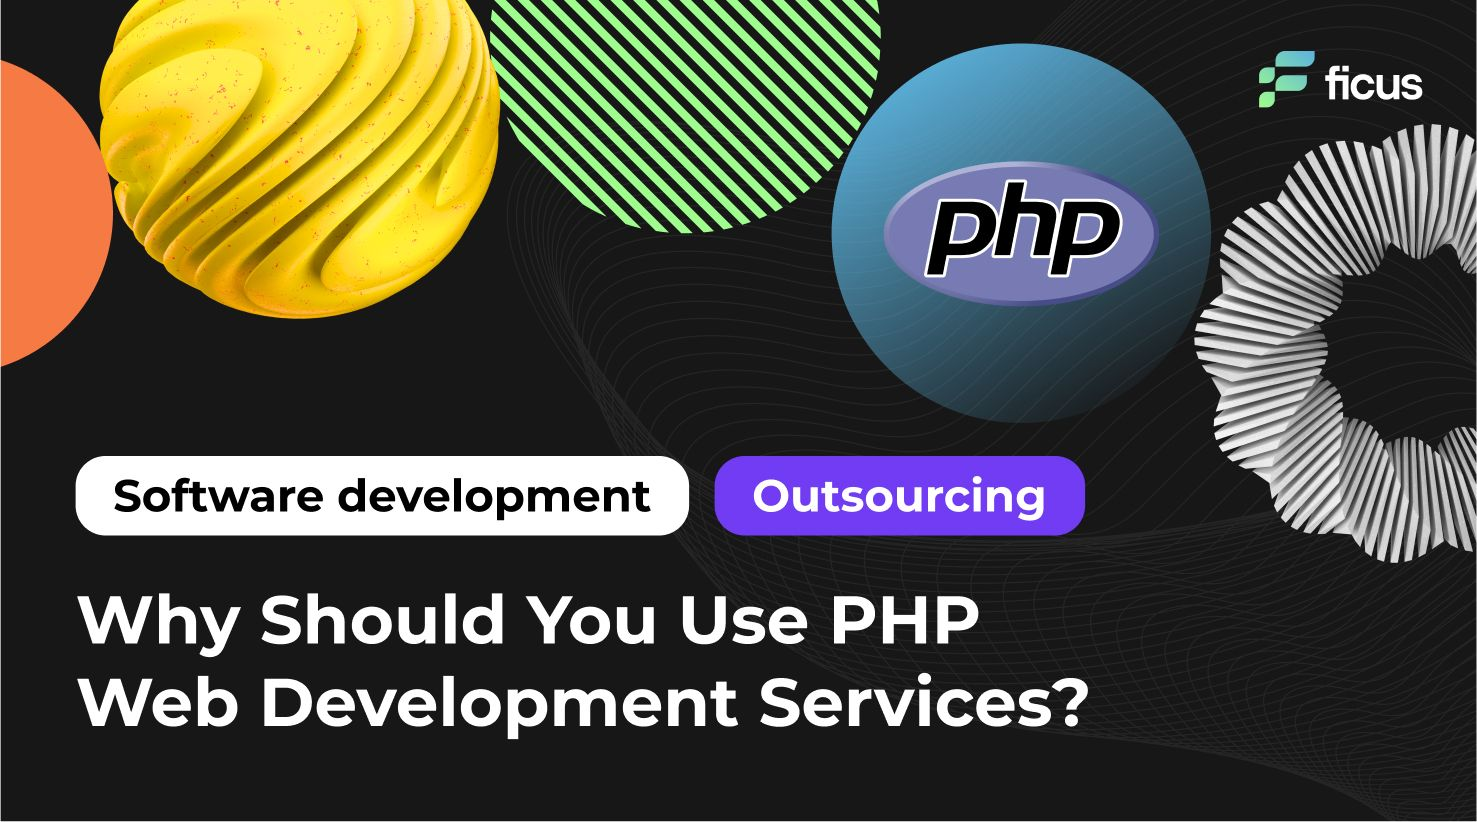 Why Should You Use PHP Web Development Services?